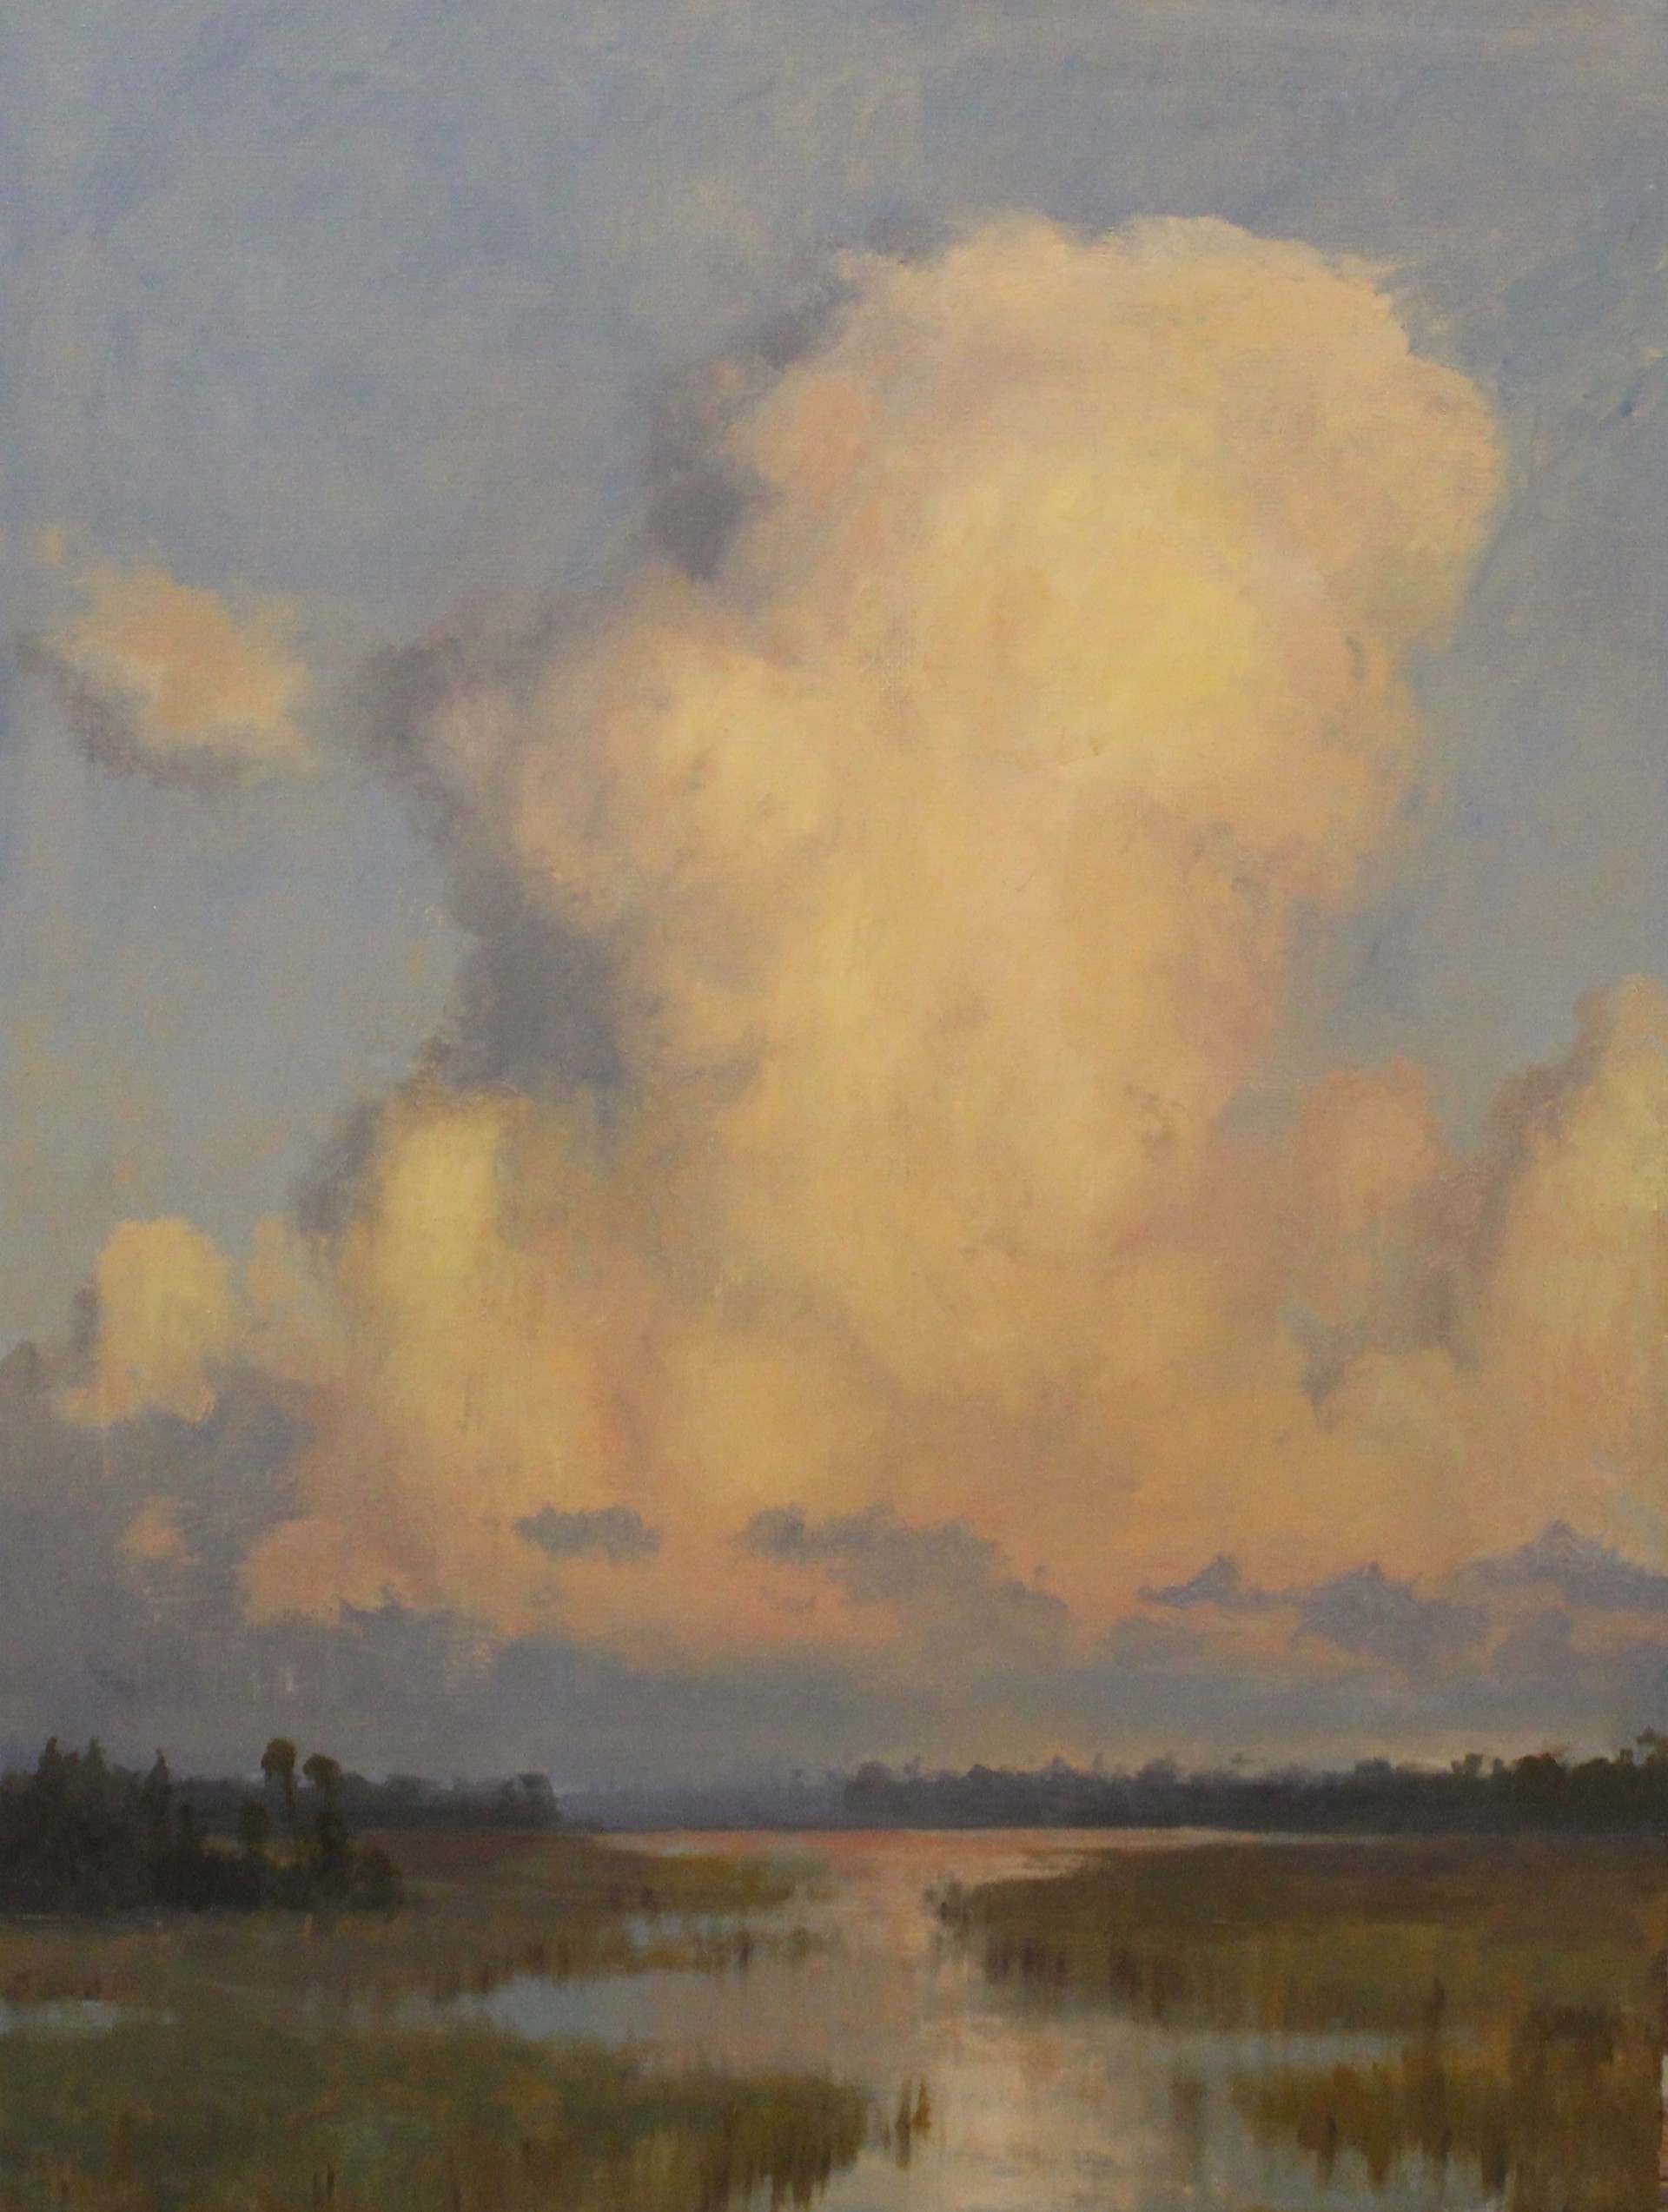 Rising Storm by Roger Dale Brown